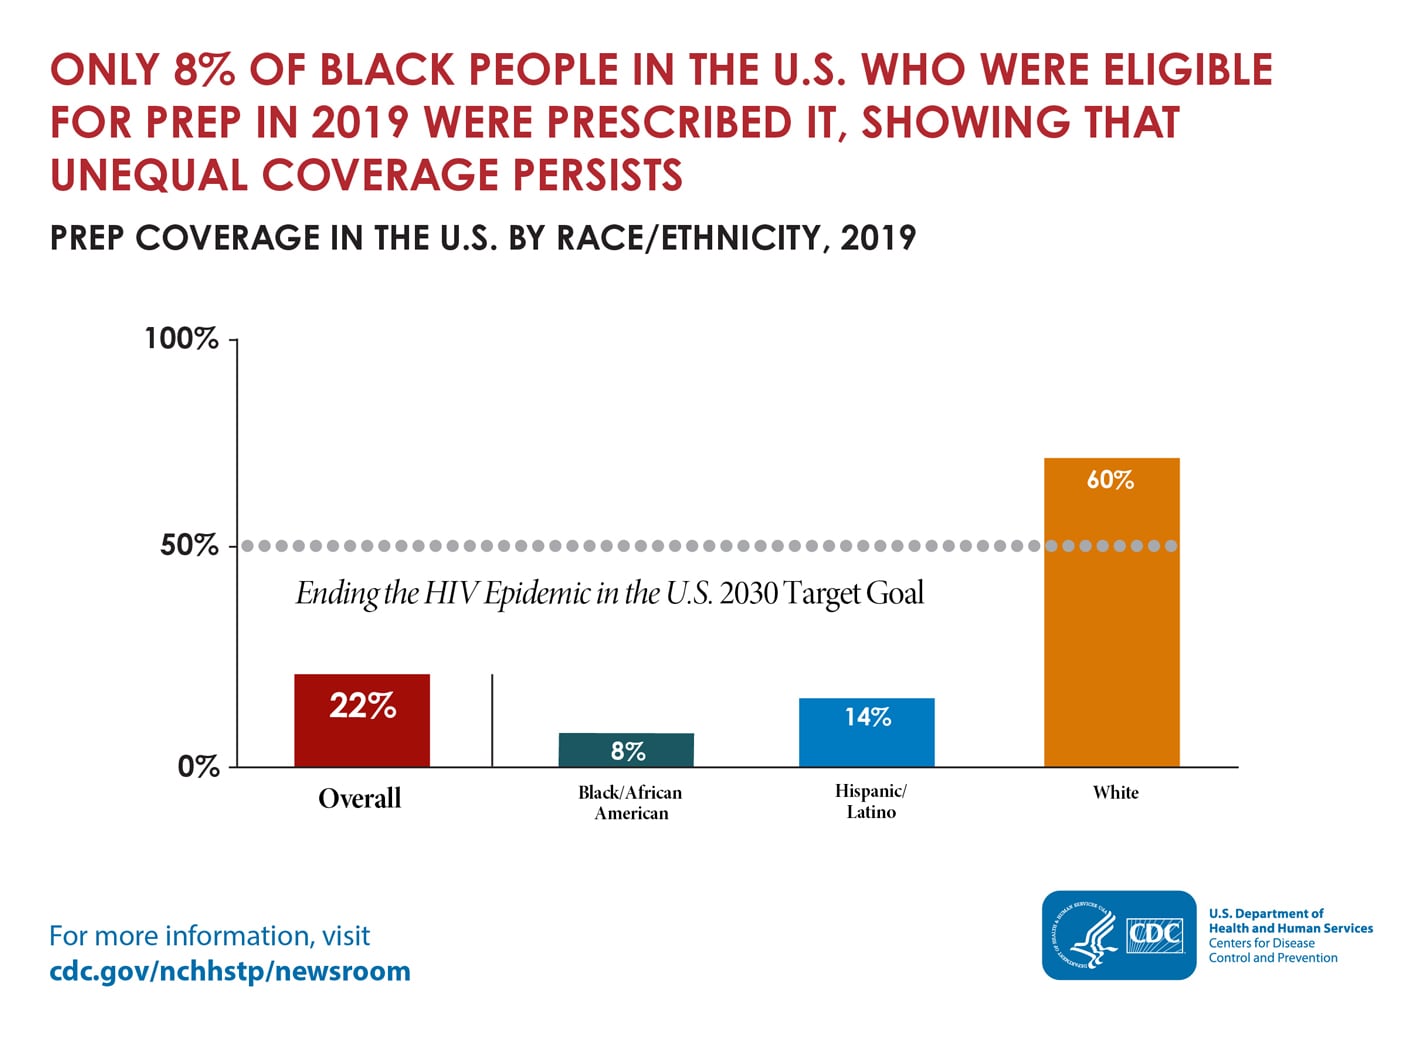 : The bar graph shows that in 2019, 22% of people in the U.S. who were eligible for PrEP were prescribed it. The bar graph also shows that 8% of Black/African American people, 14% of Hispanic/Latino people, and 60% of White people who were eligible for PrEP were prescribed it.